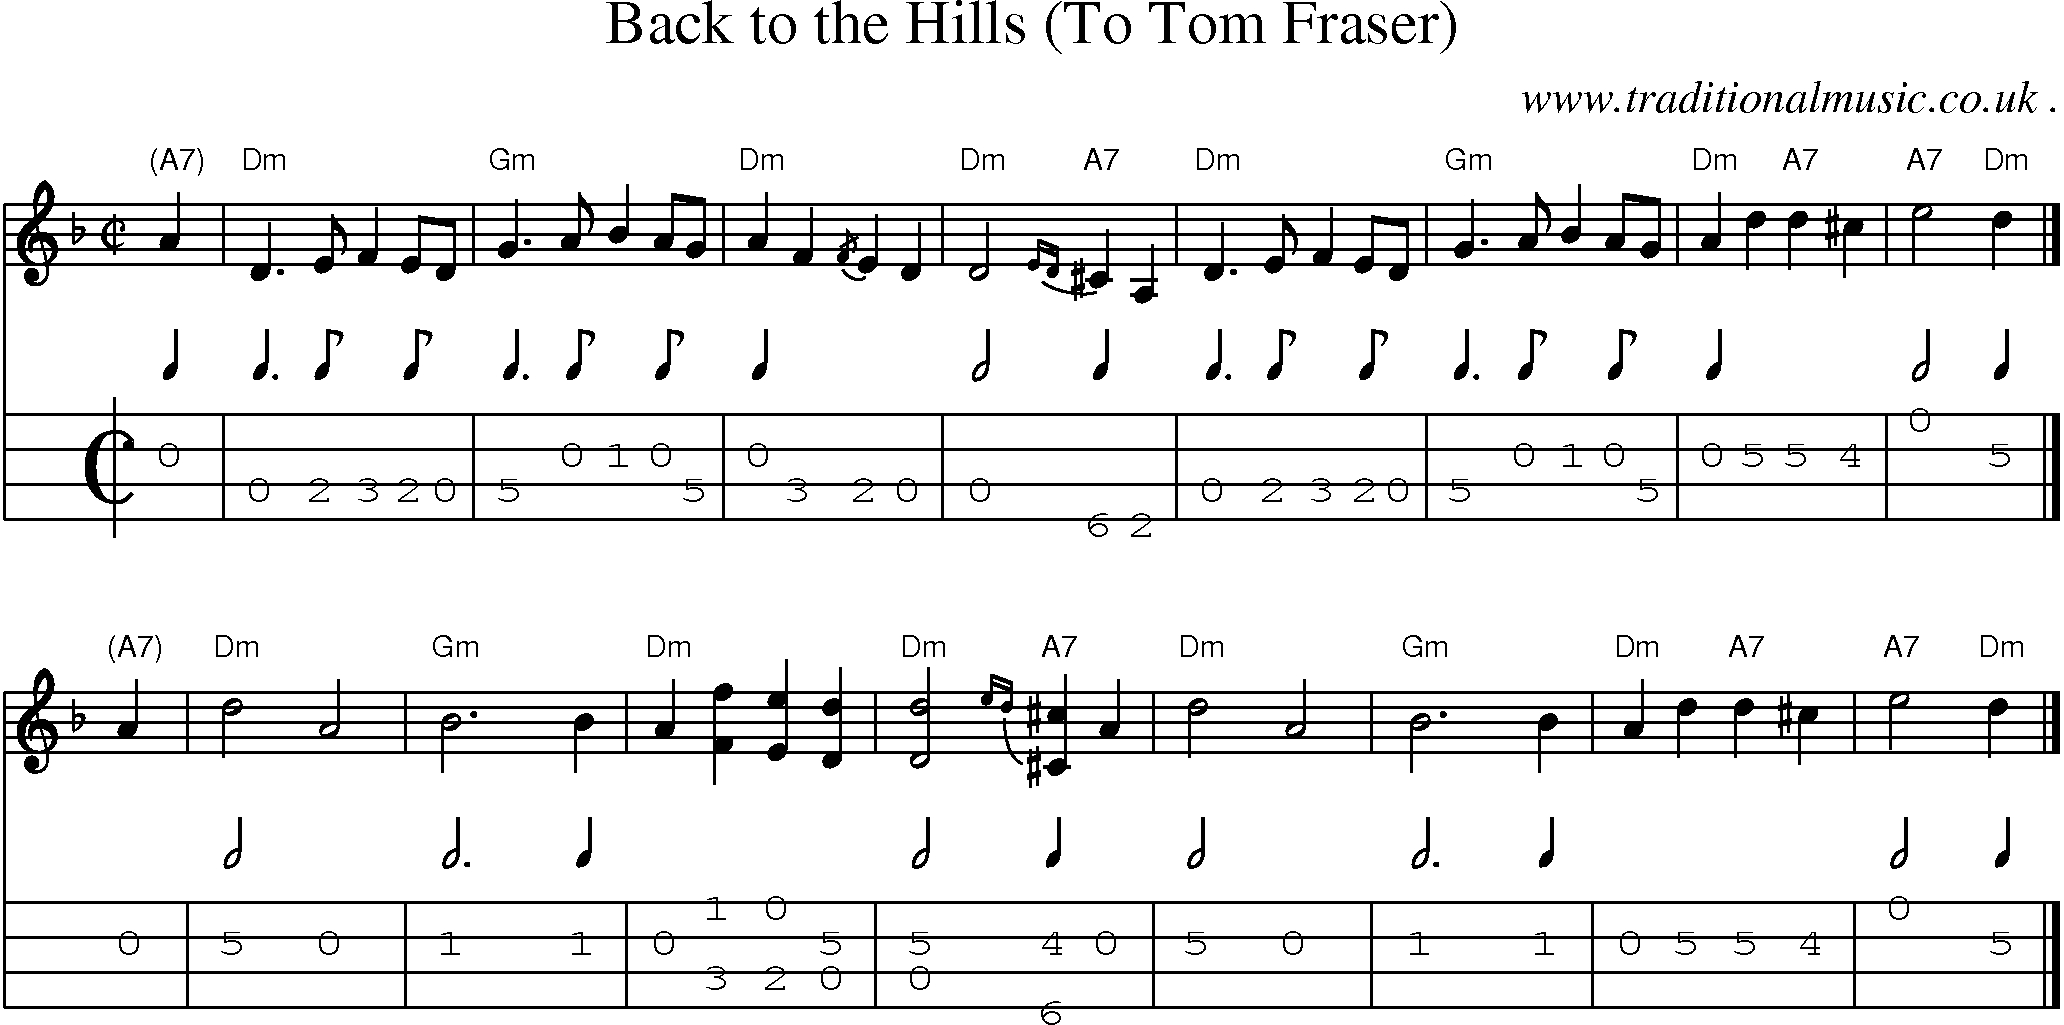 Sheet-music  score, Chords and Mandolin Tabs for Back To The Hills To Tom Fraser